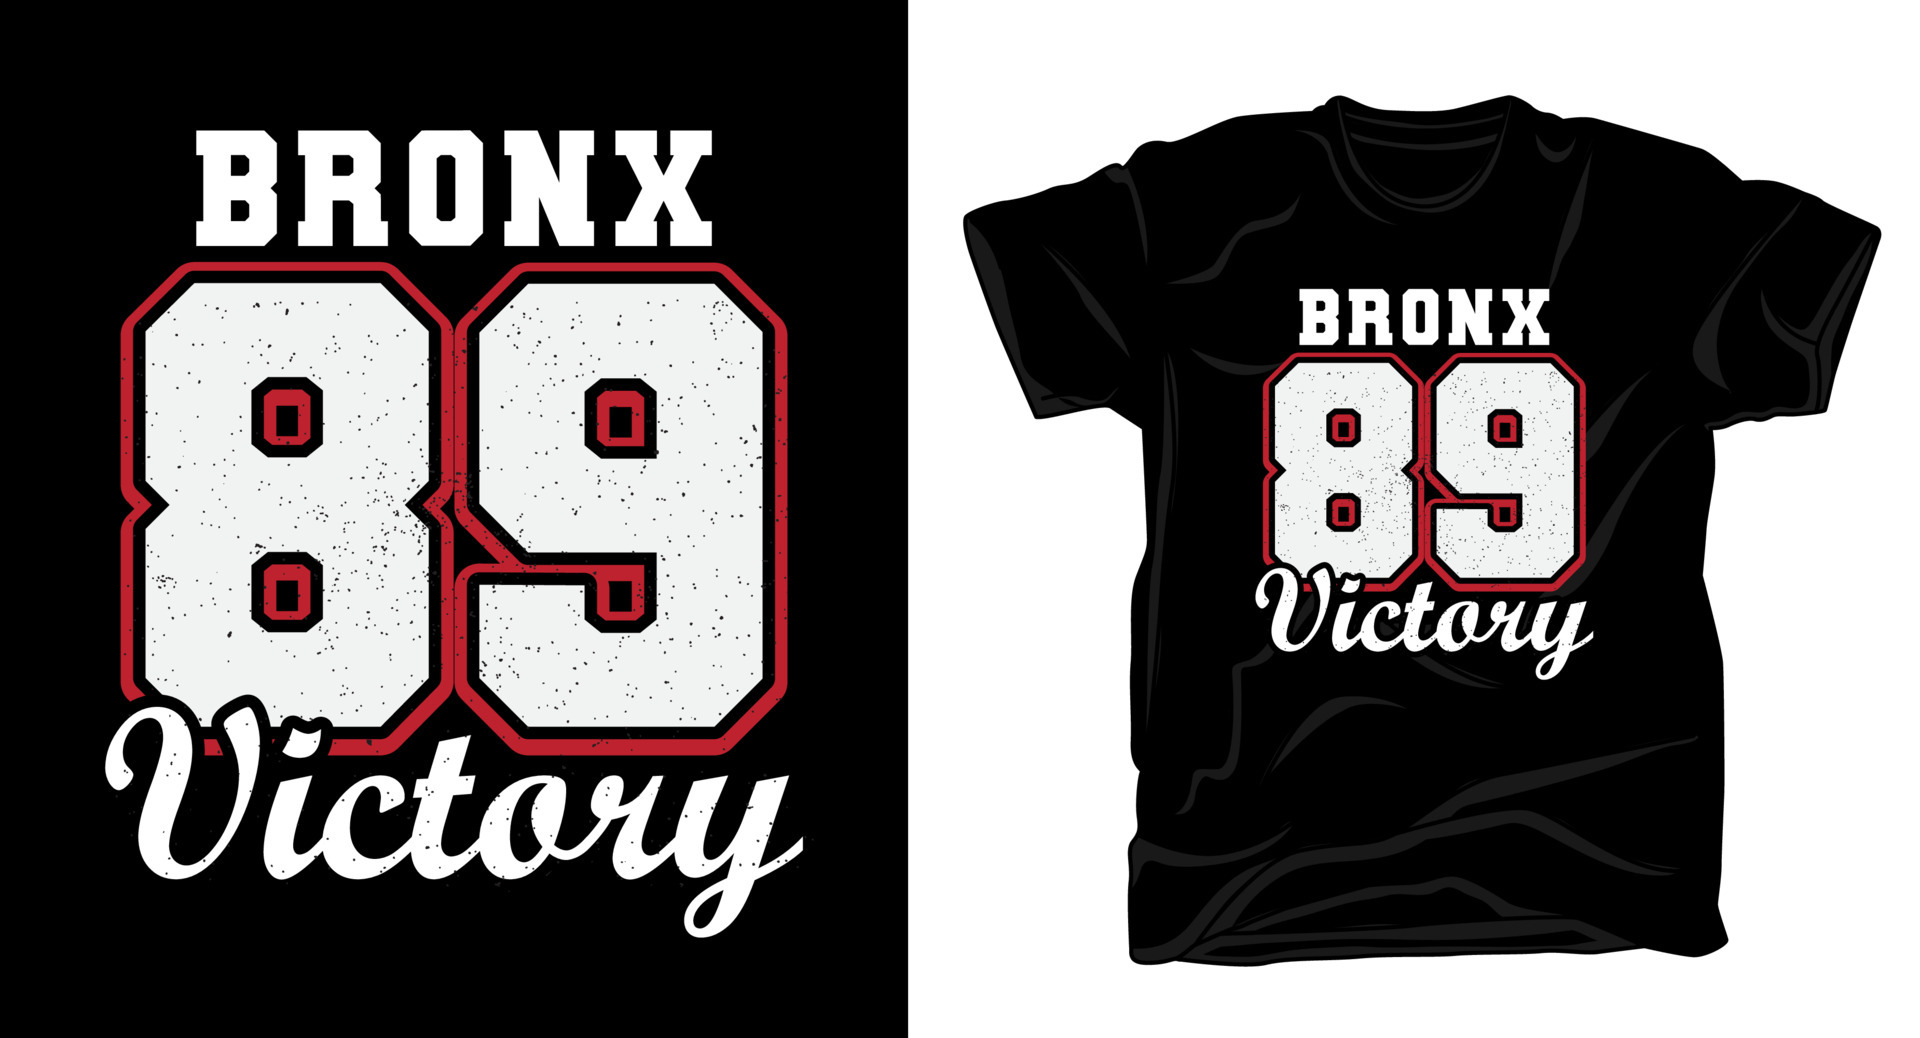 Bronx eighty nine victory typography for t-shirt design 5438685 Vector ...